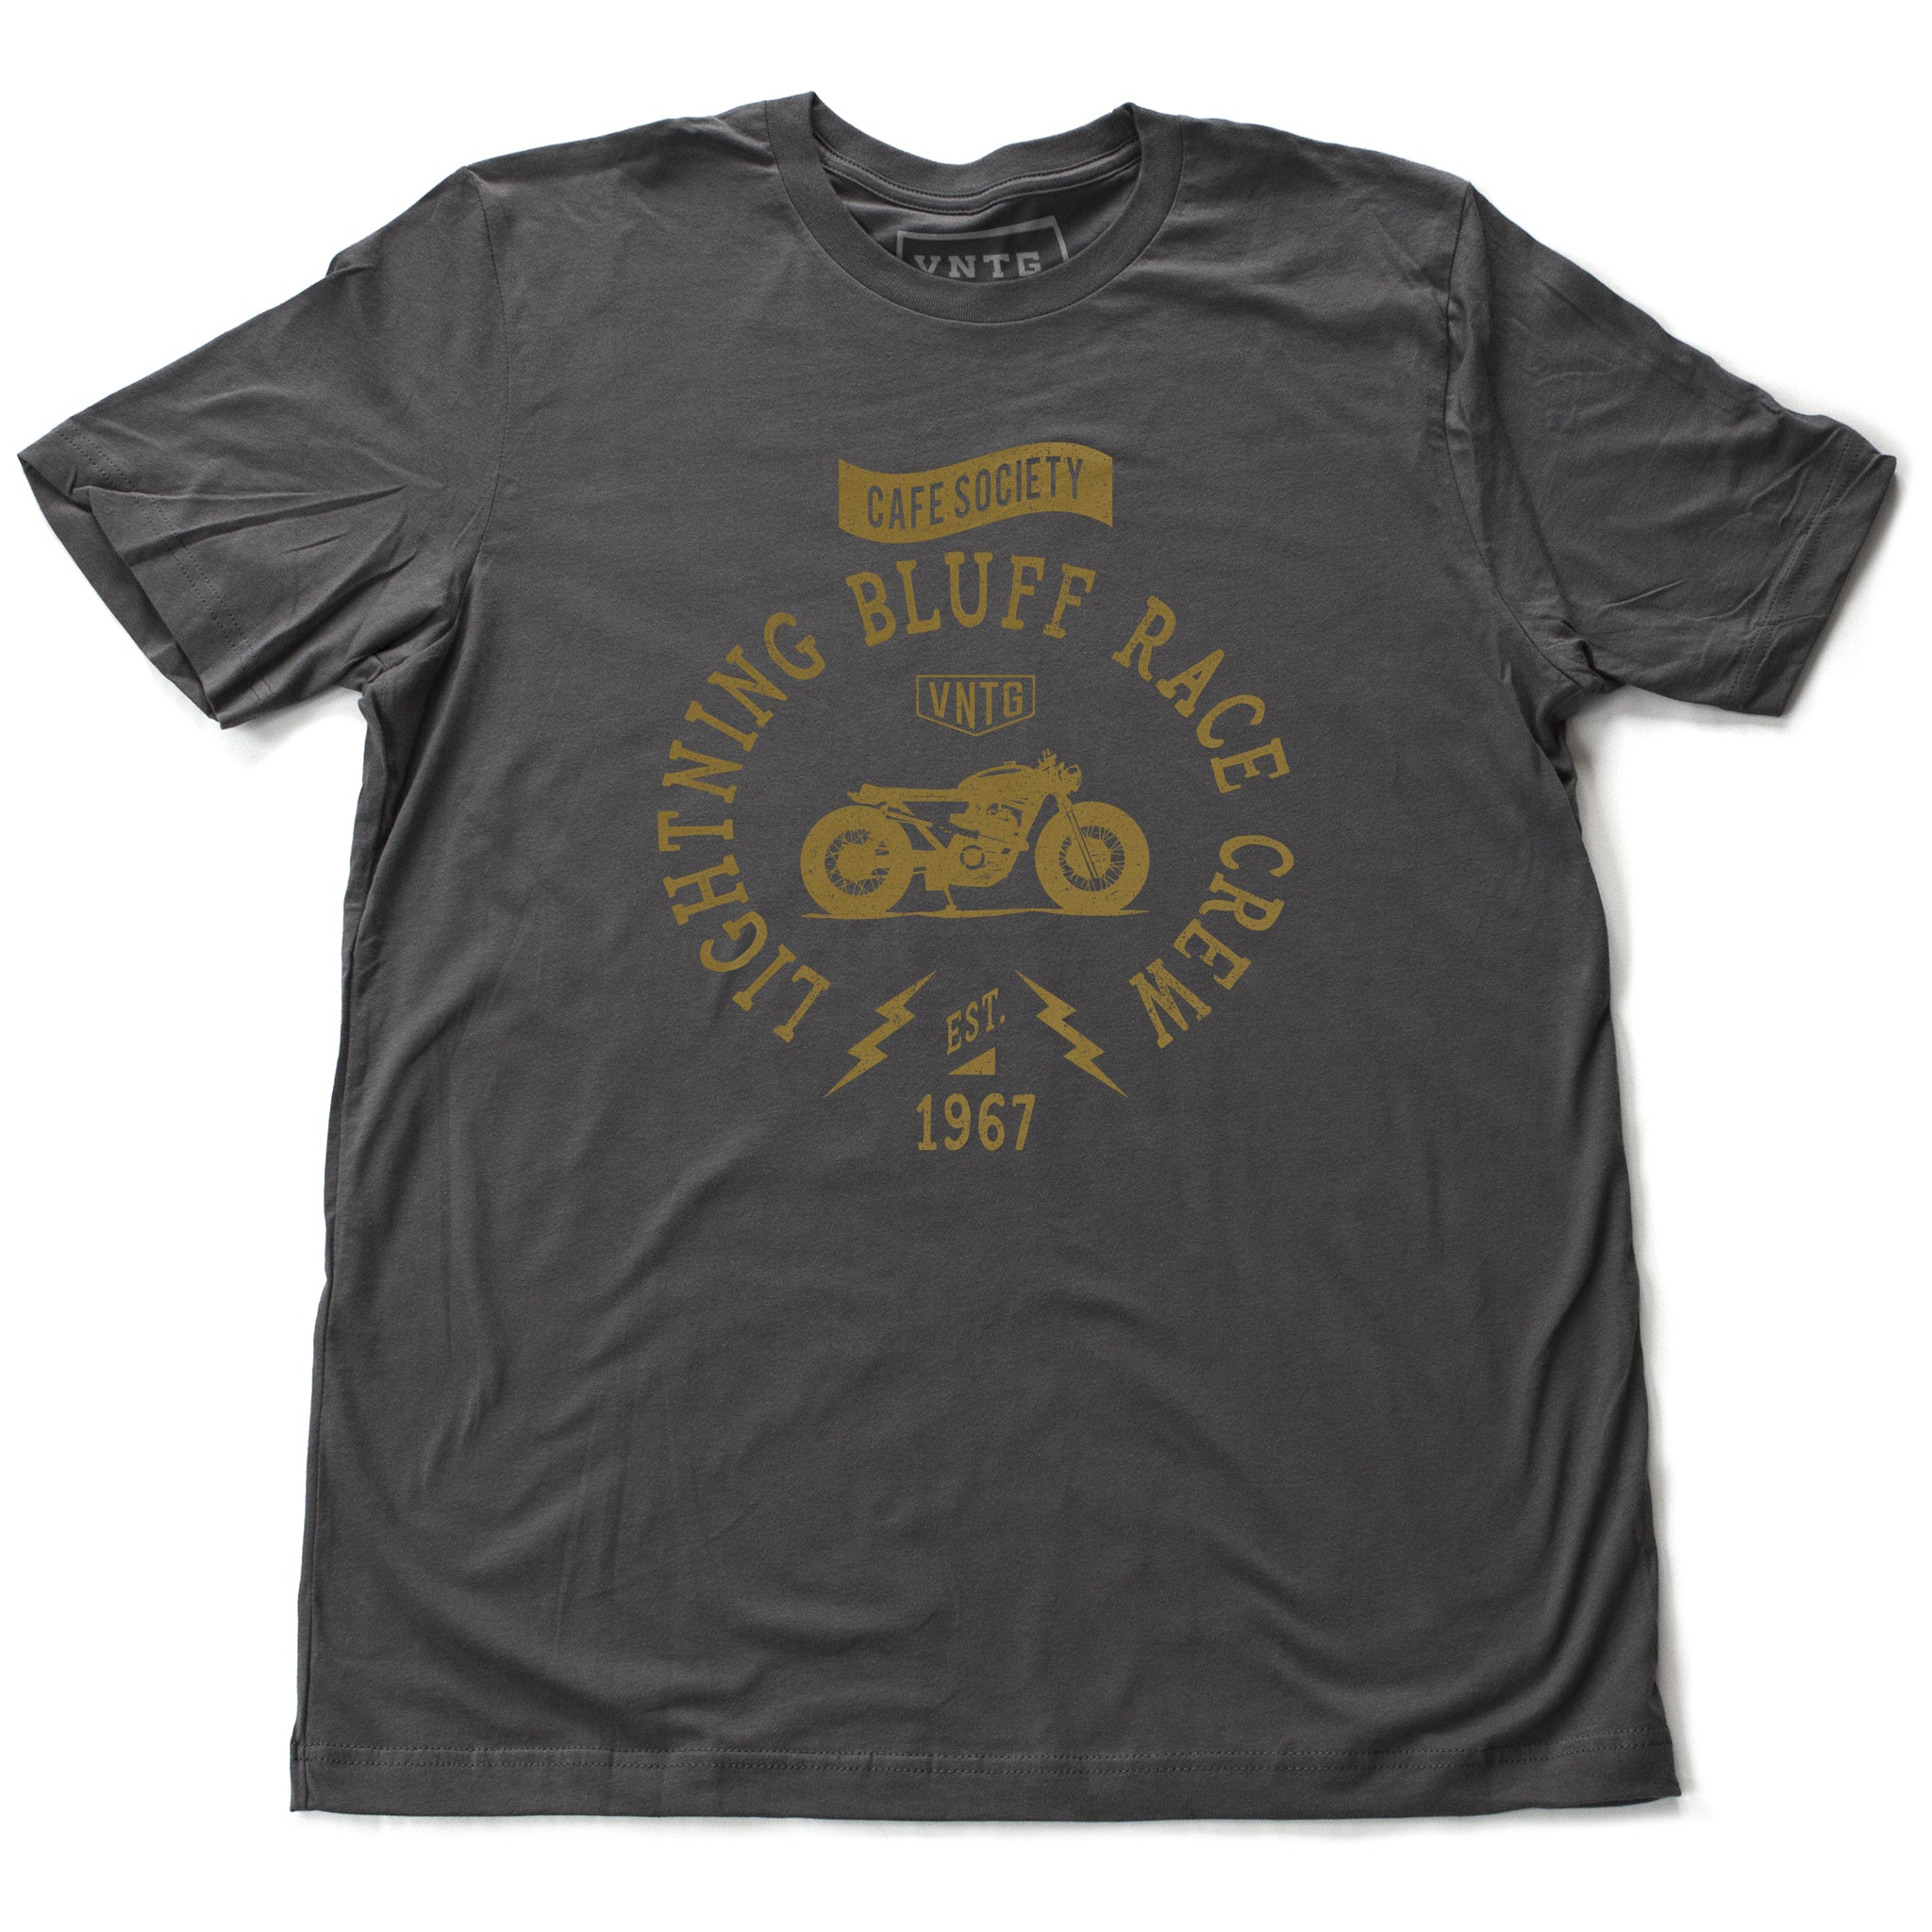 A vintage-inspired retro t-shirt for a fictitious motorcycle race crew. For the café racer genre of vintage motorcycles, this shirt reads “Lightning Bluff Race Crew, established 1967” in Asphalt Gray, by fashion brand VNTG., for wolfsaint.net 